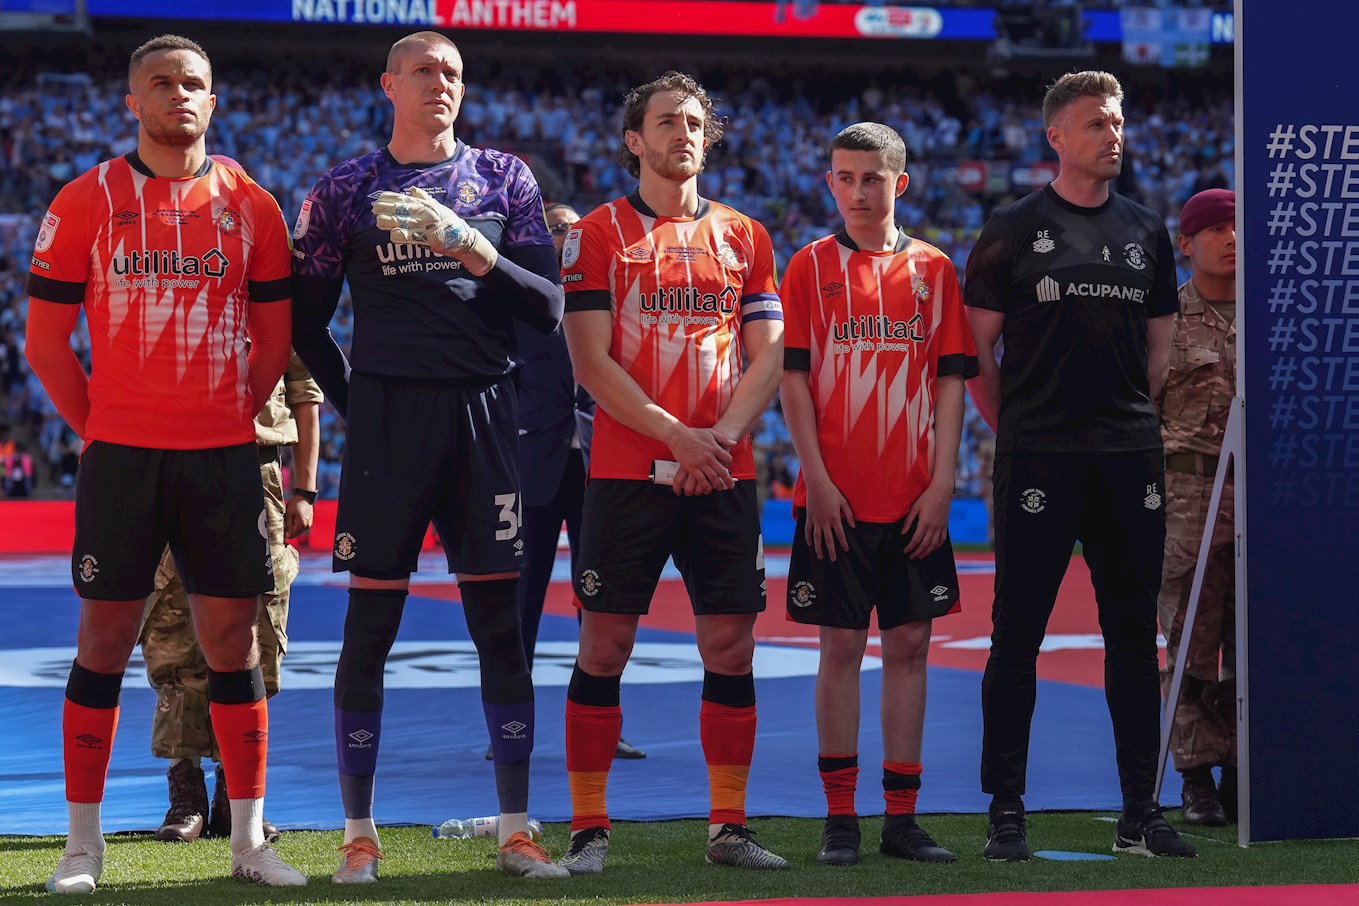 Tom Lockyer lined up with the Luton Town team during the national anthem.